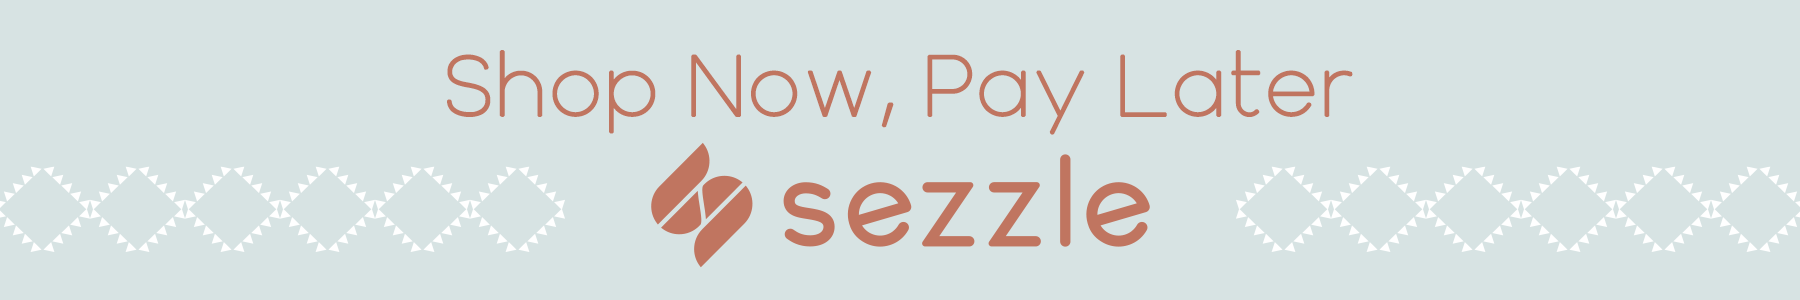 Shop Now, Pay Later, Sezzle 